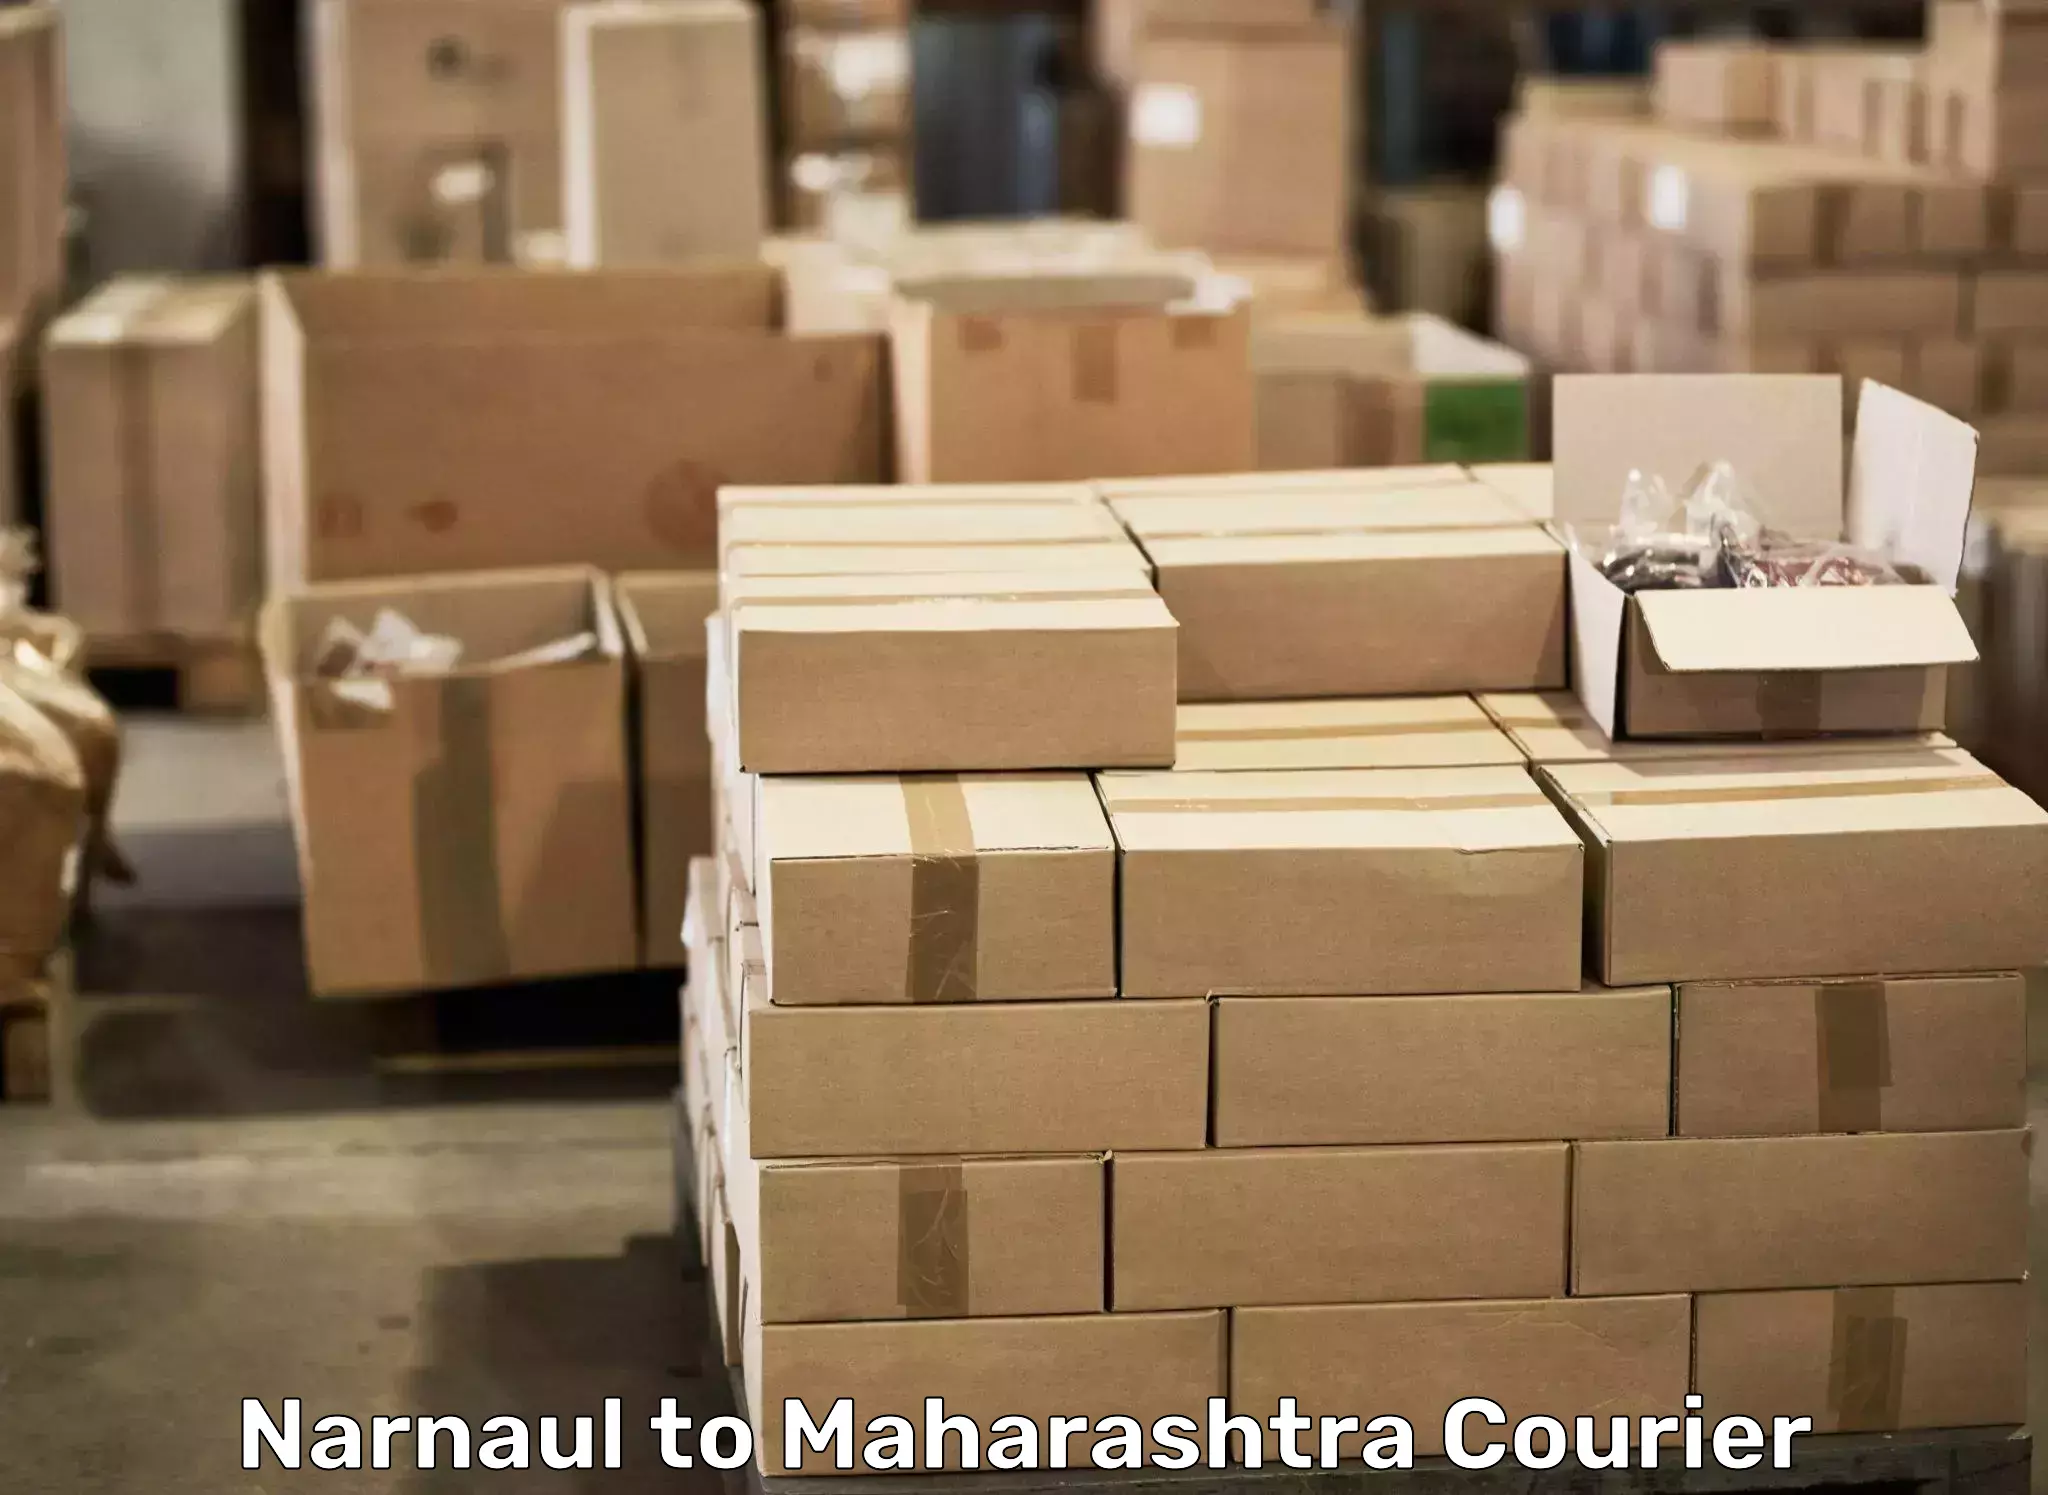 Quality moving company Narnaul to Pune